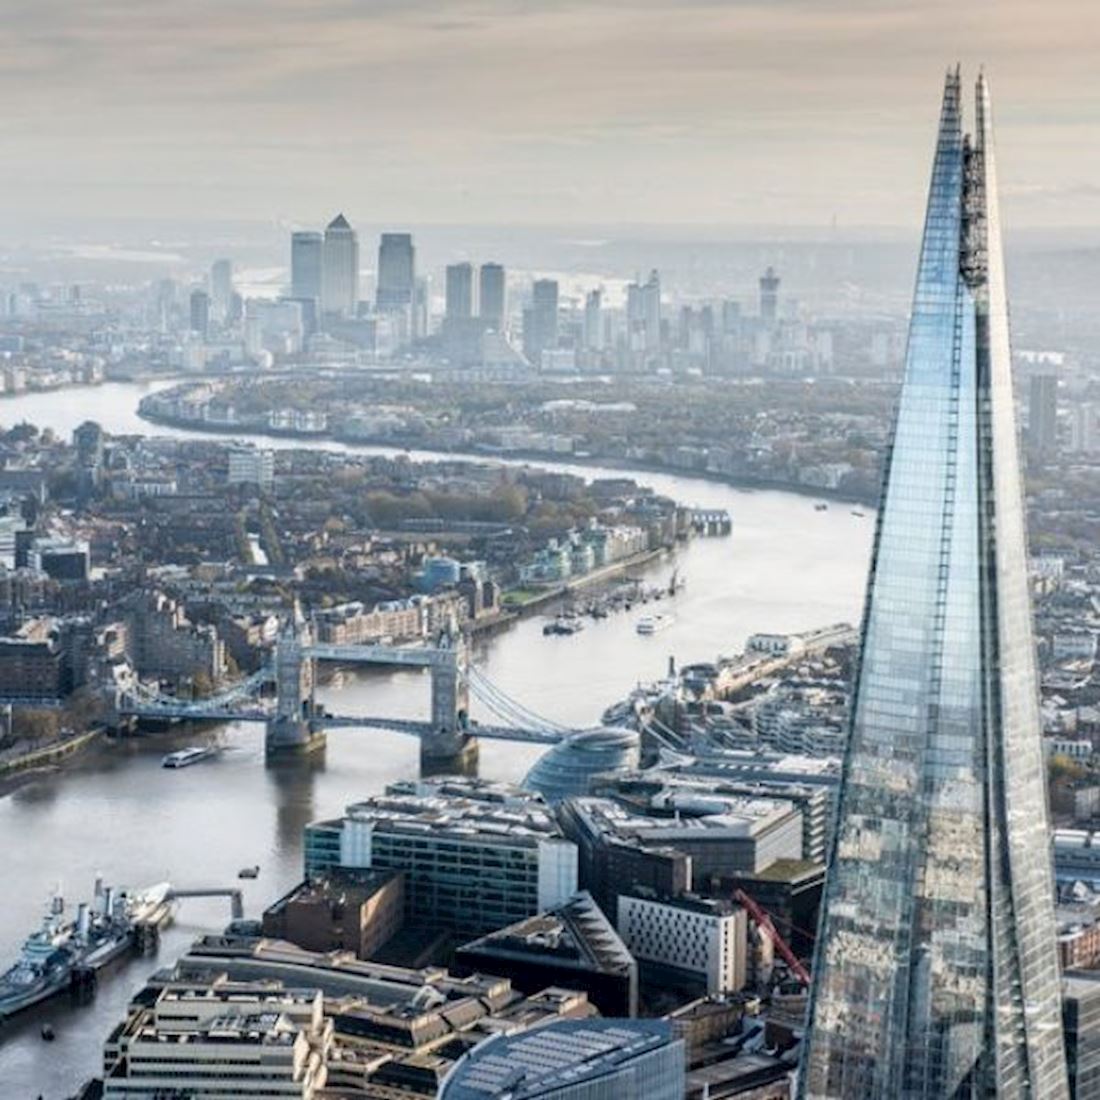 Vodafone are helping LondonEnergy connect their sites for quicker and more reliable communications